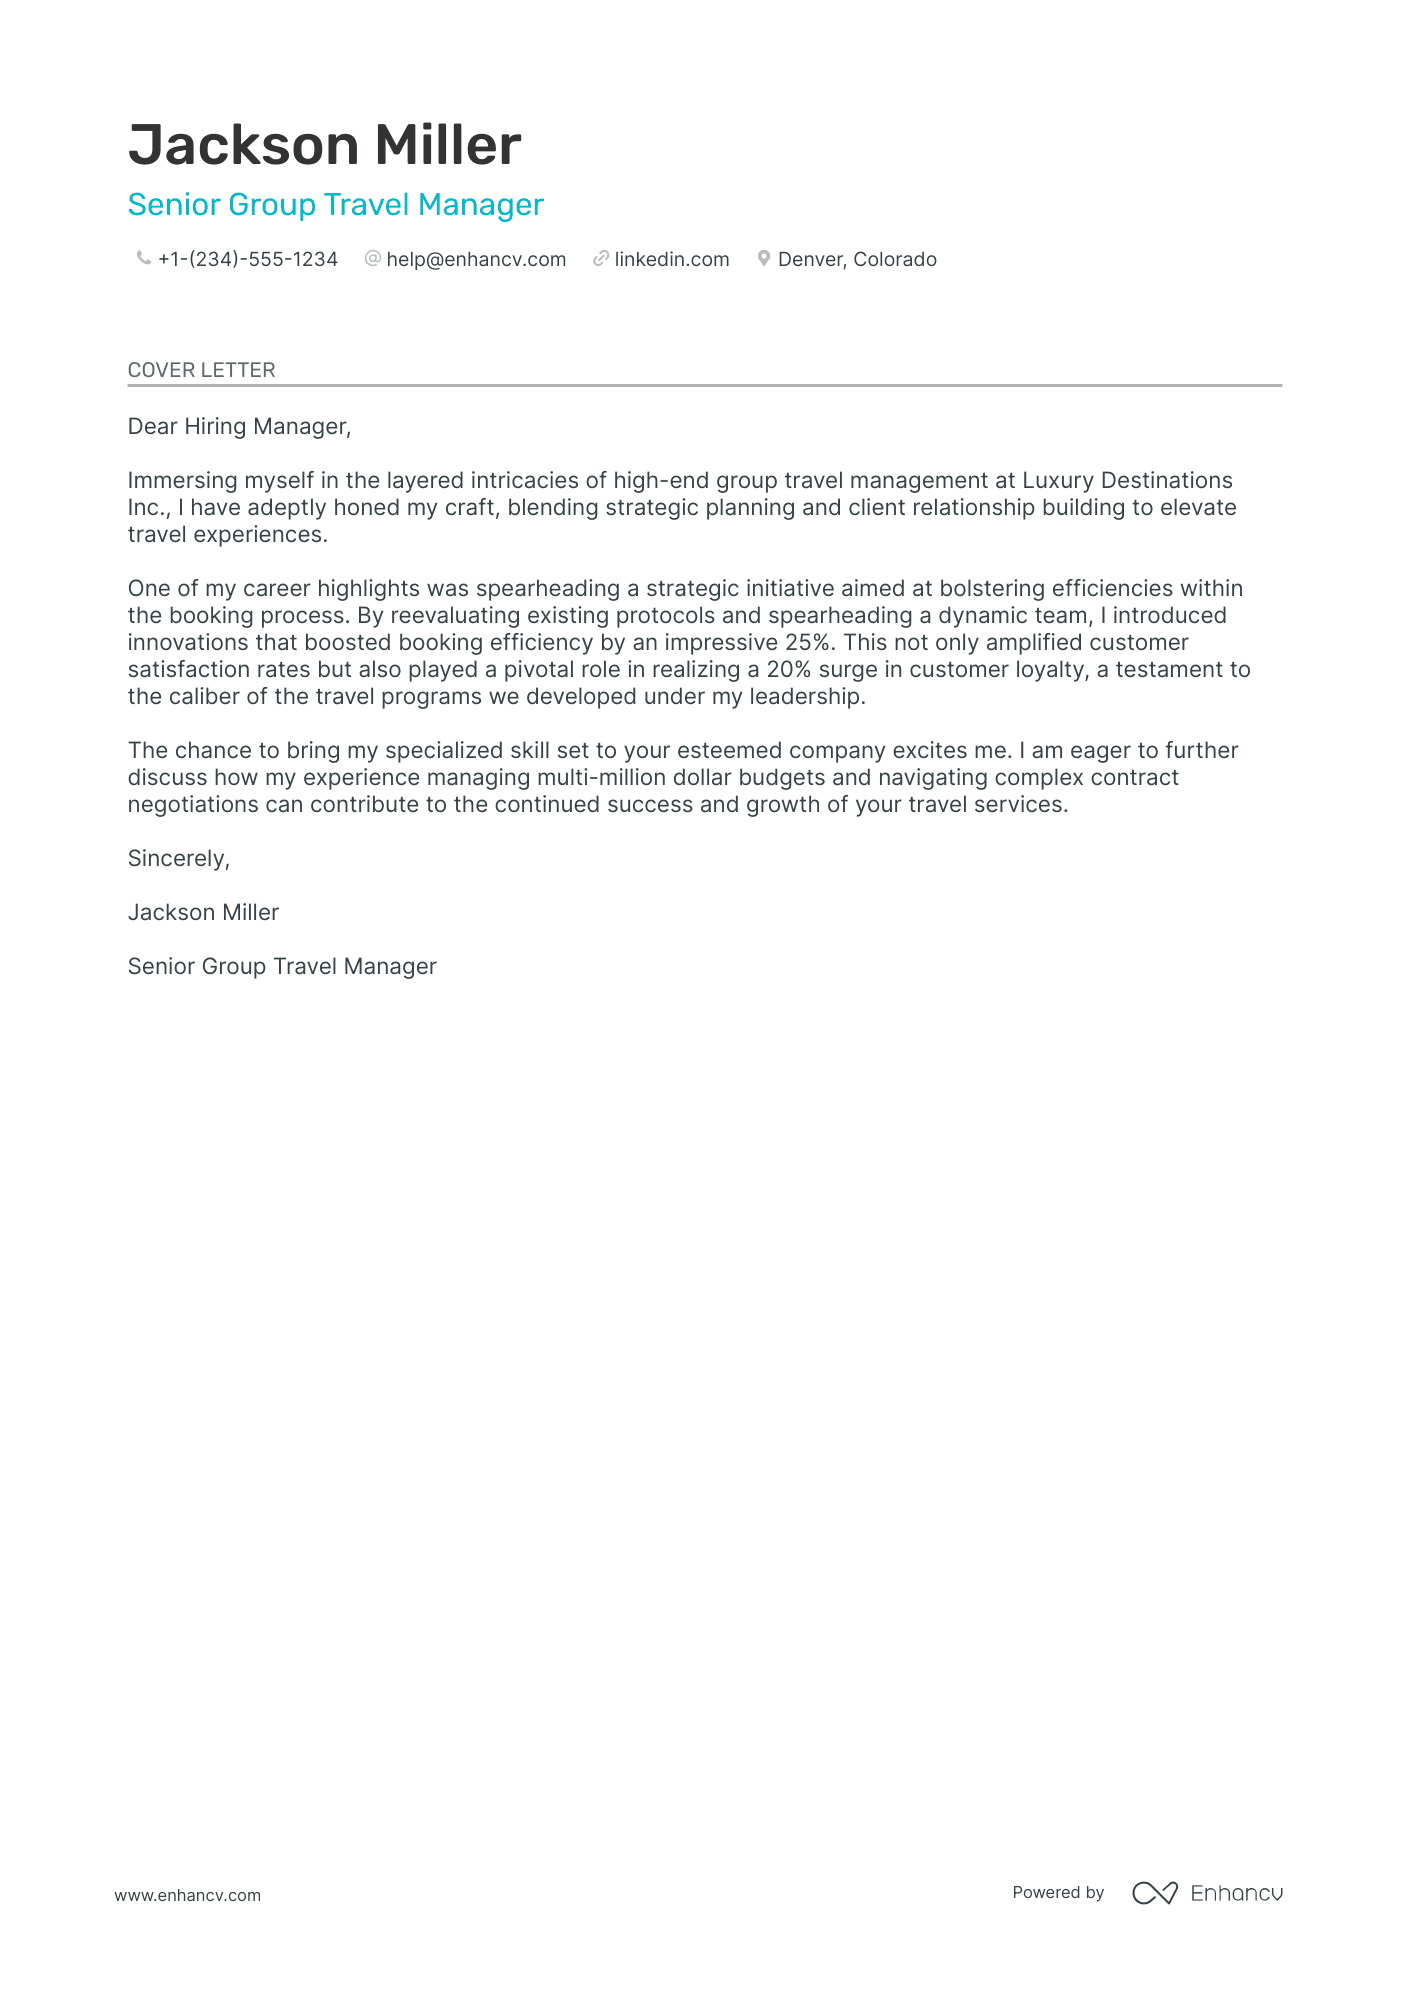 Travel Manager cover letter